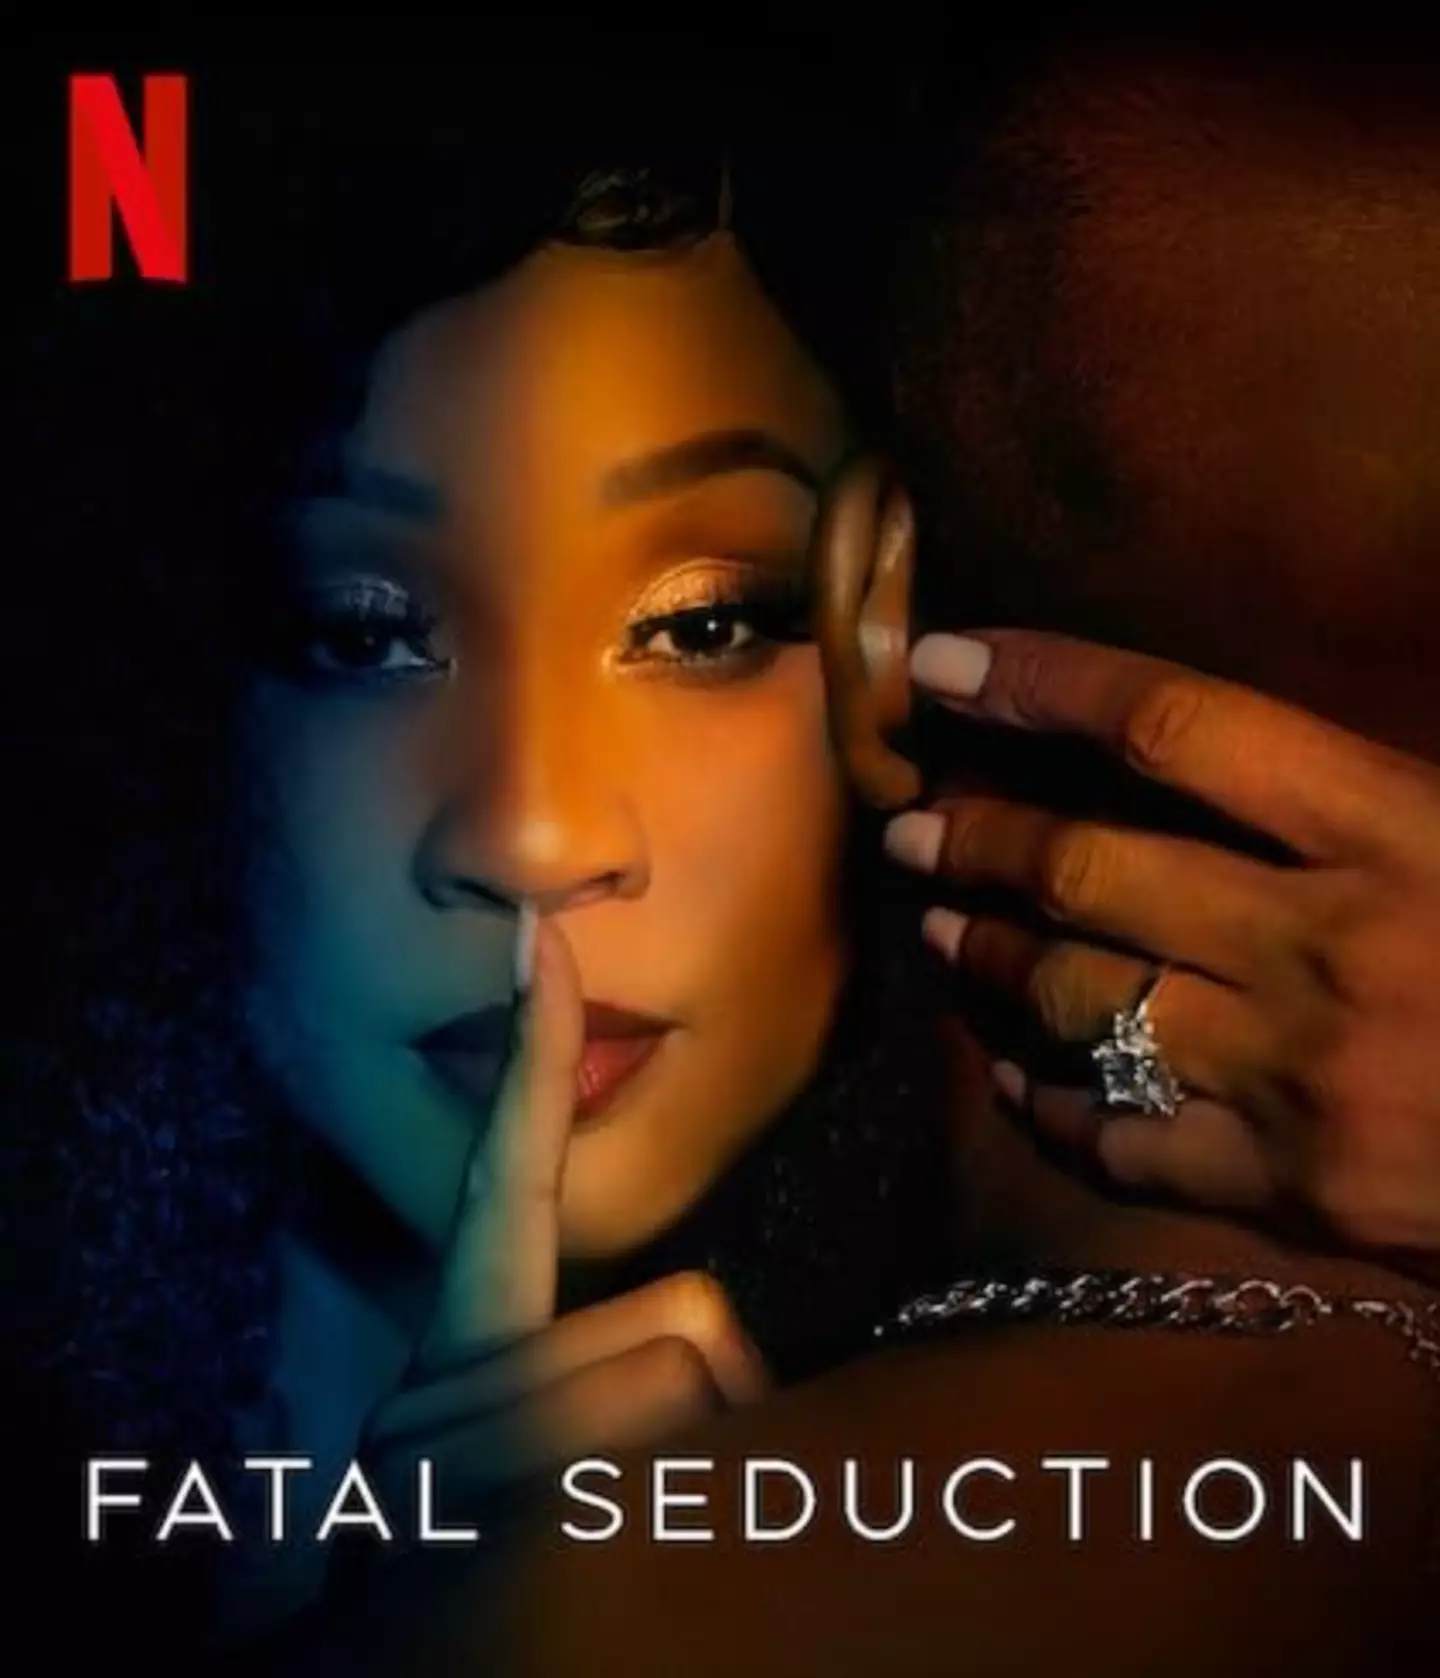 South African series Fatal Seduction has been recommended by Netflix viewers.